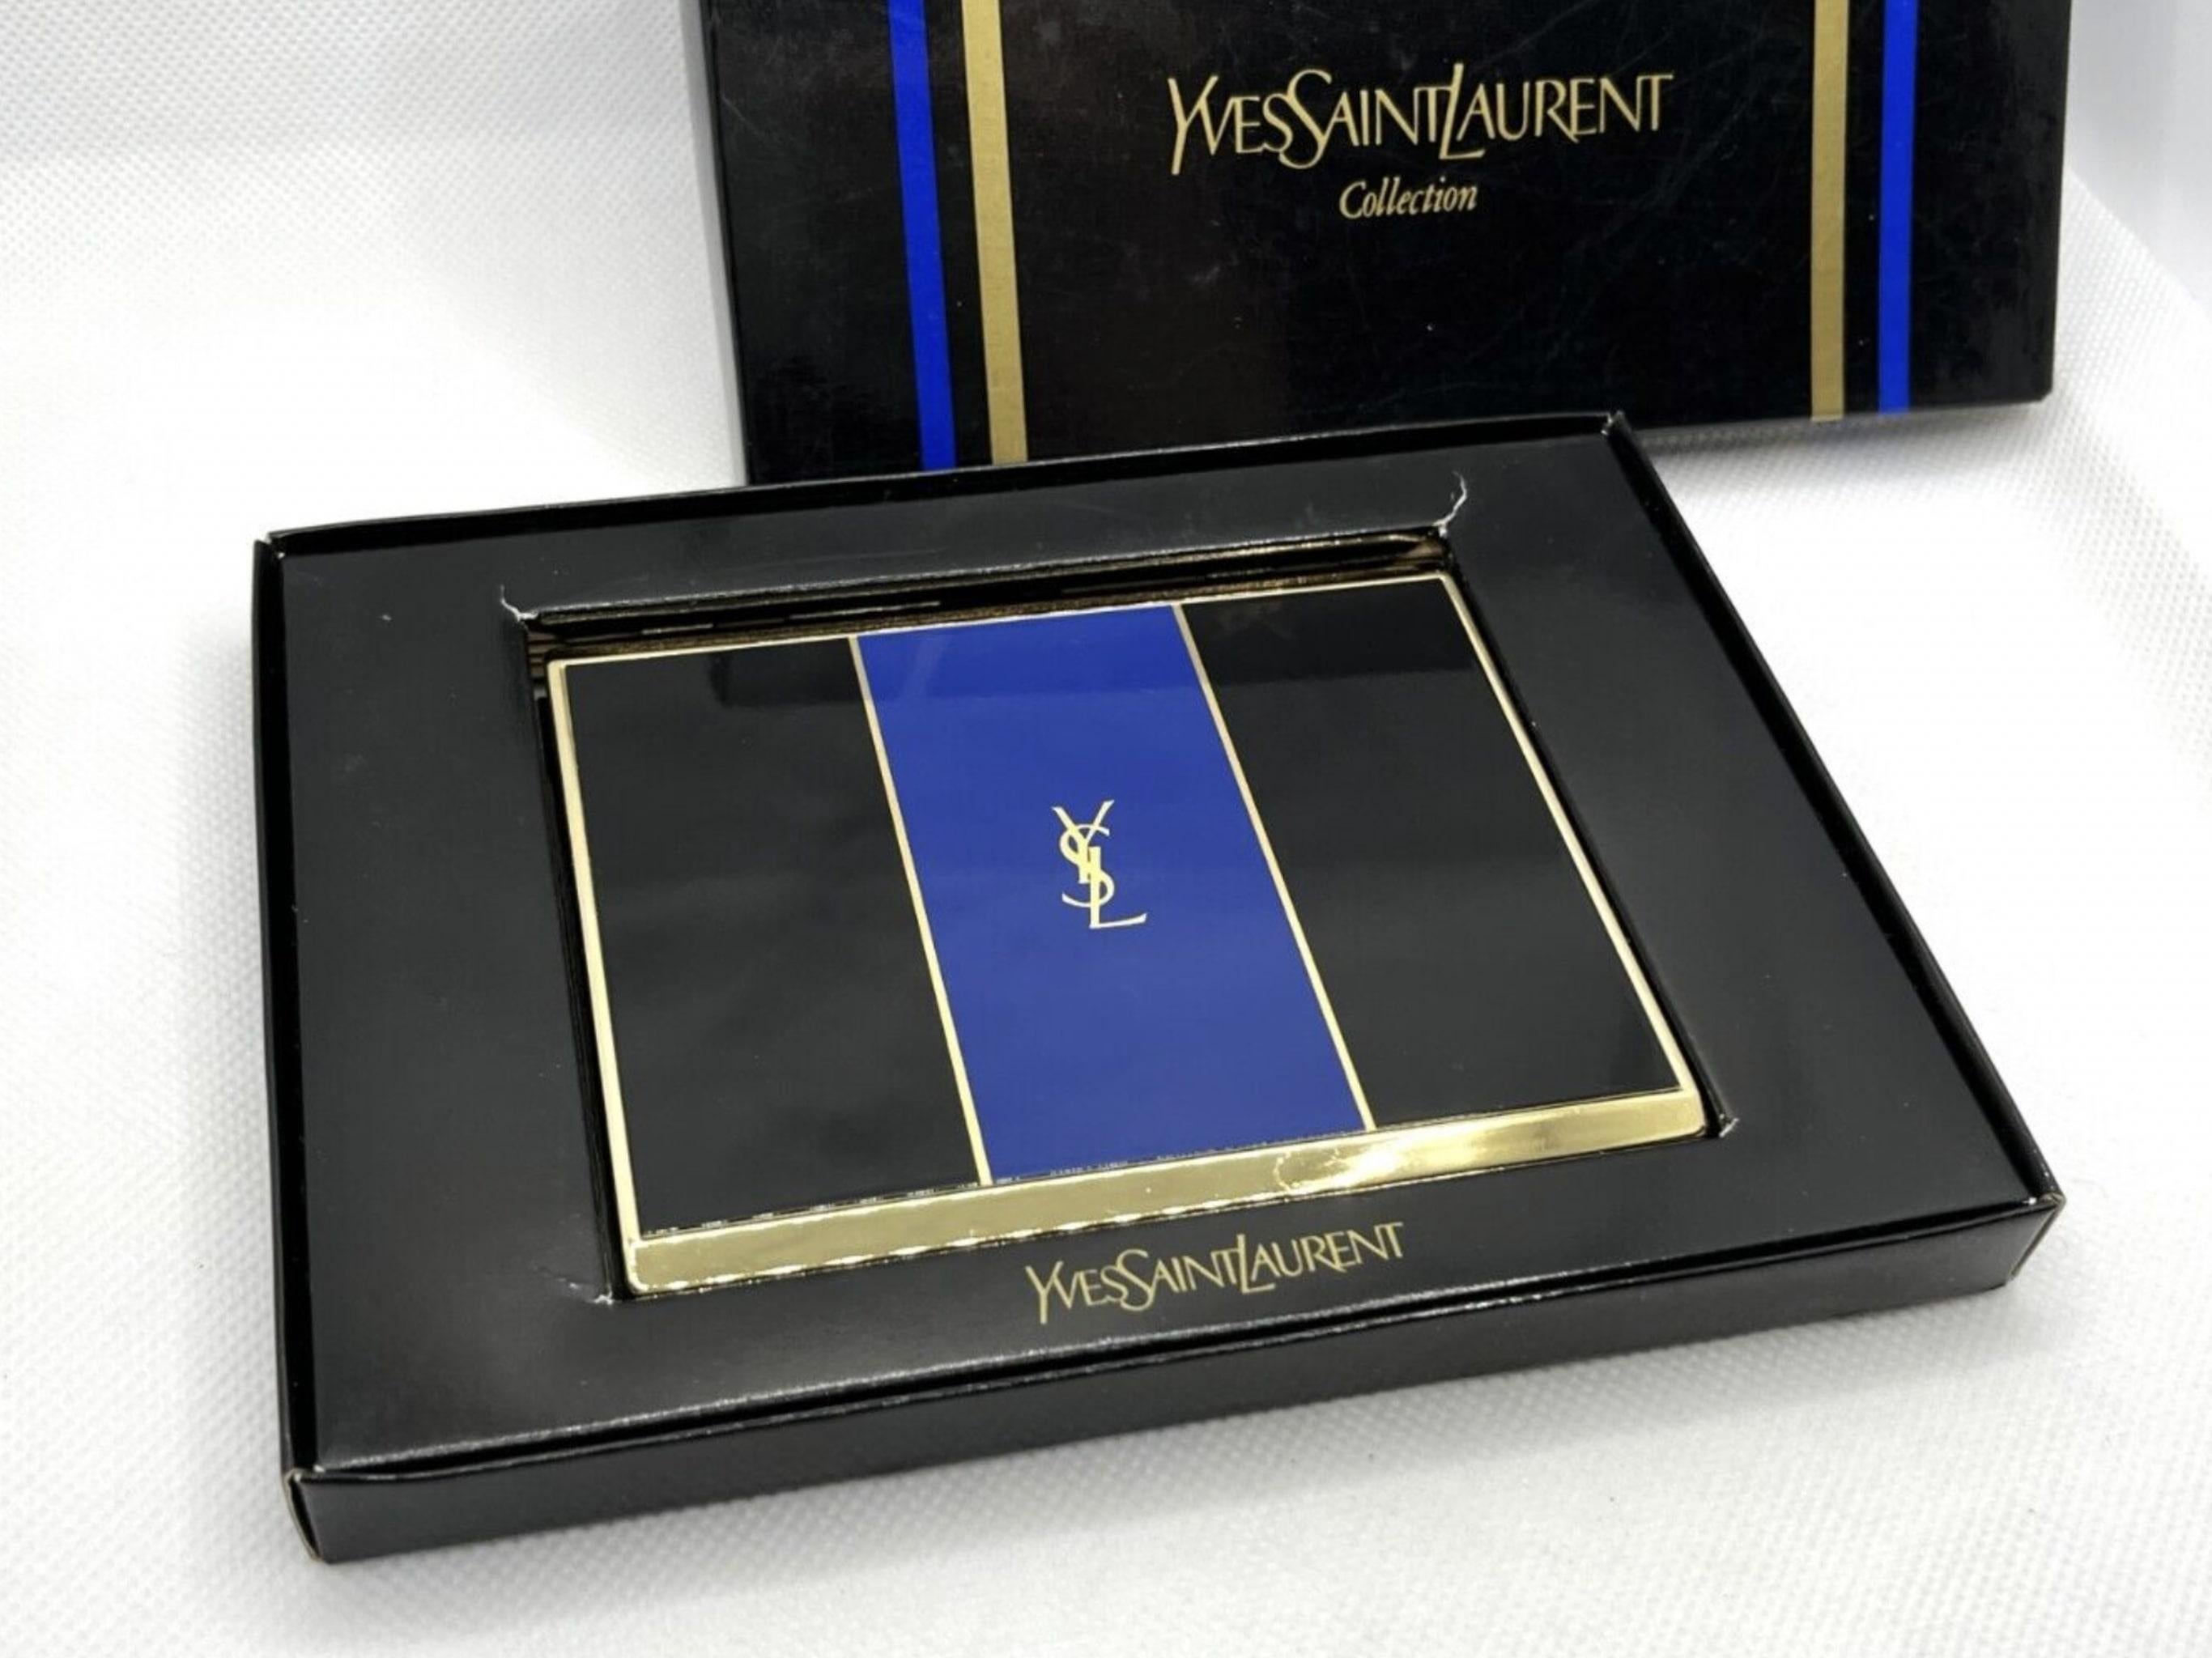 “YSL” Yves Saint Laurent retro cigarette case 
Logo Cigarette Case Gold Black Blue
The case is in mint condition. Was never use. In original Yves Saint Laurent box. 
The clasp snaps as new. 
Retro. 
Circa 1980s
Gold plated. 
Signed YSL.
Very elegant